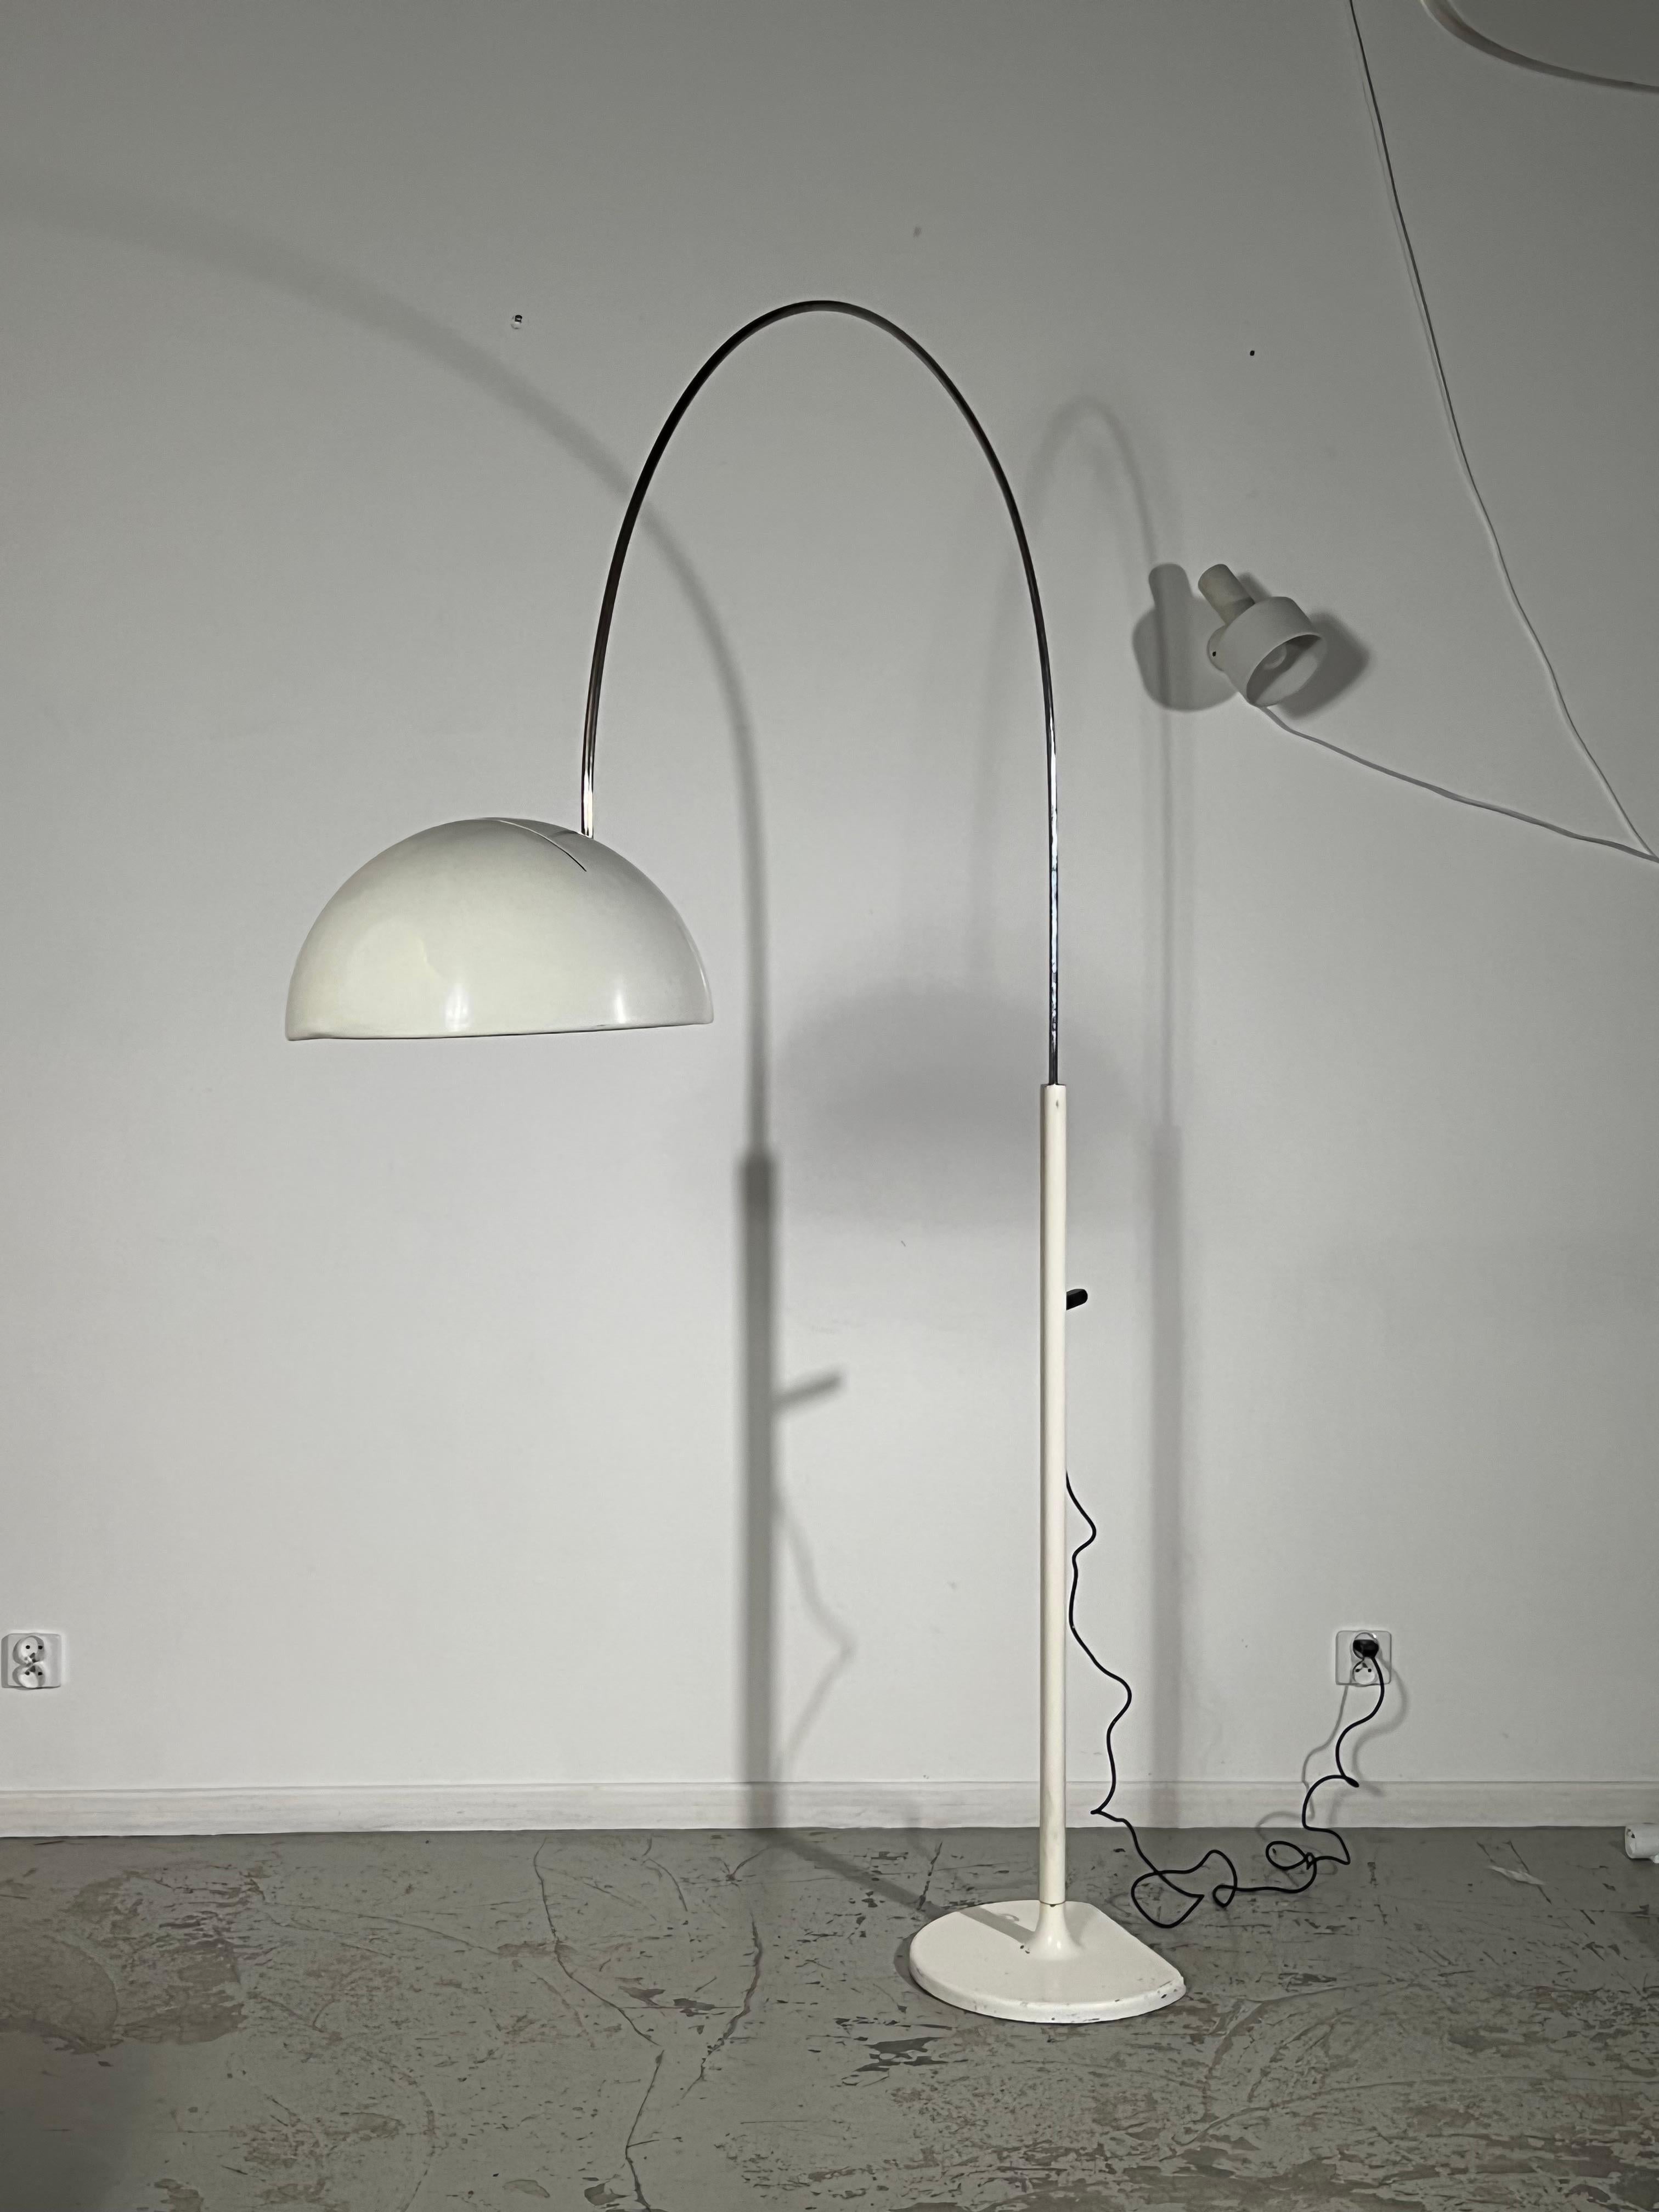 Space Age Coupe Floor Lamp by Joe Colombo for Oluce, 1960s For Sale